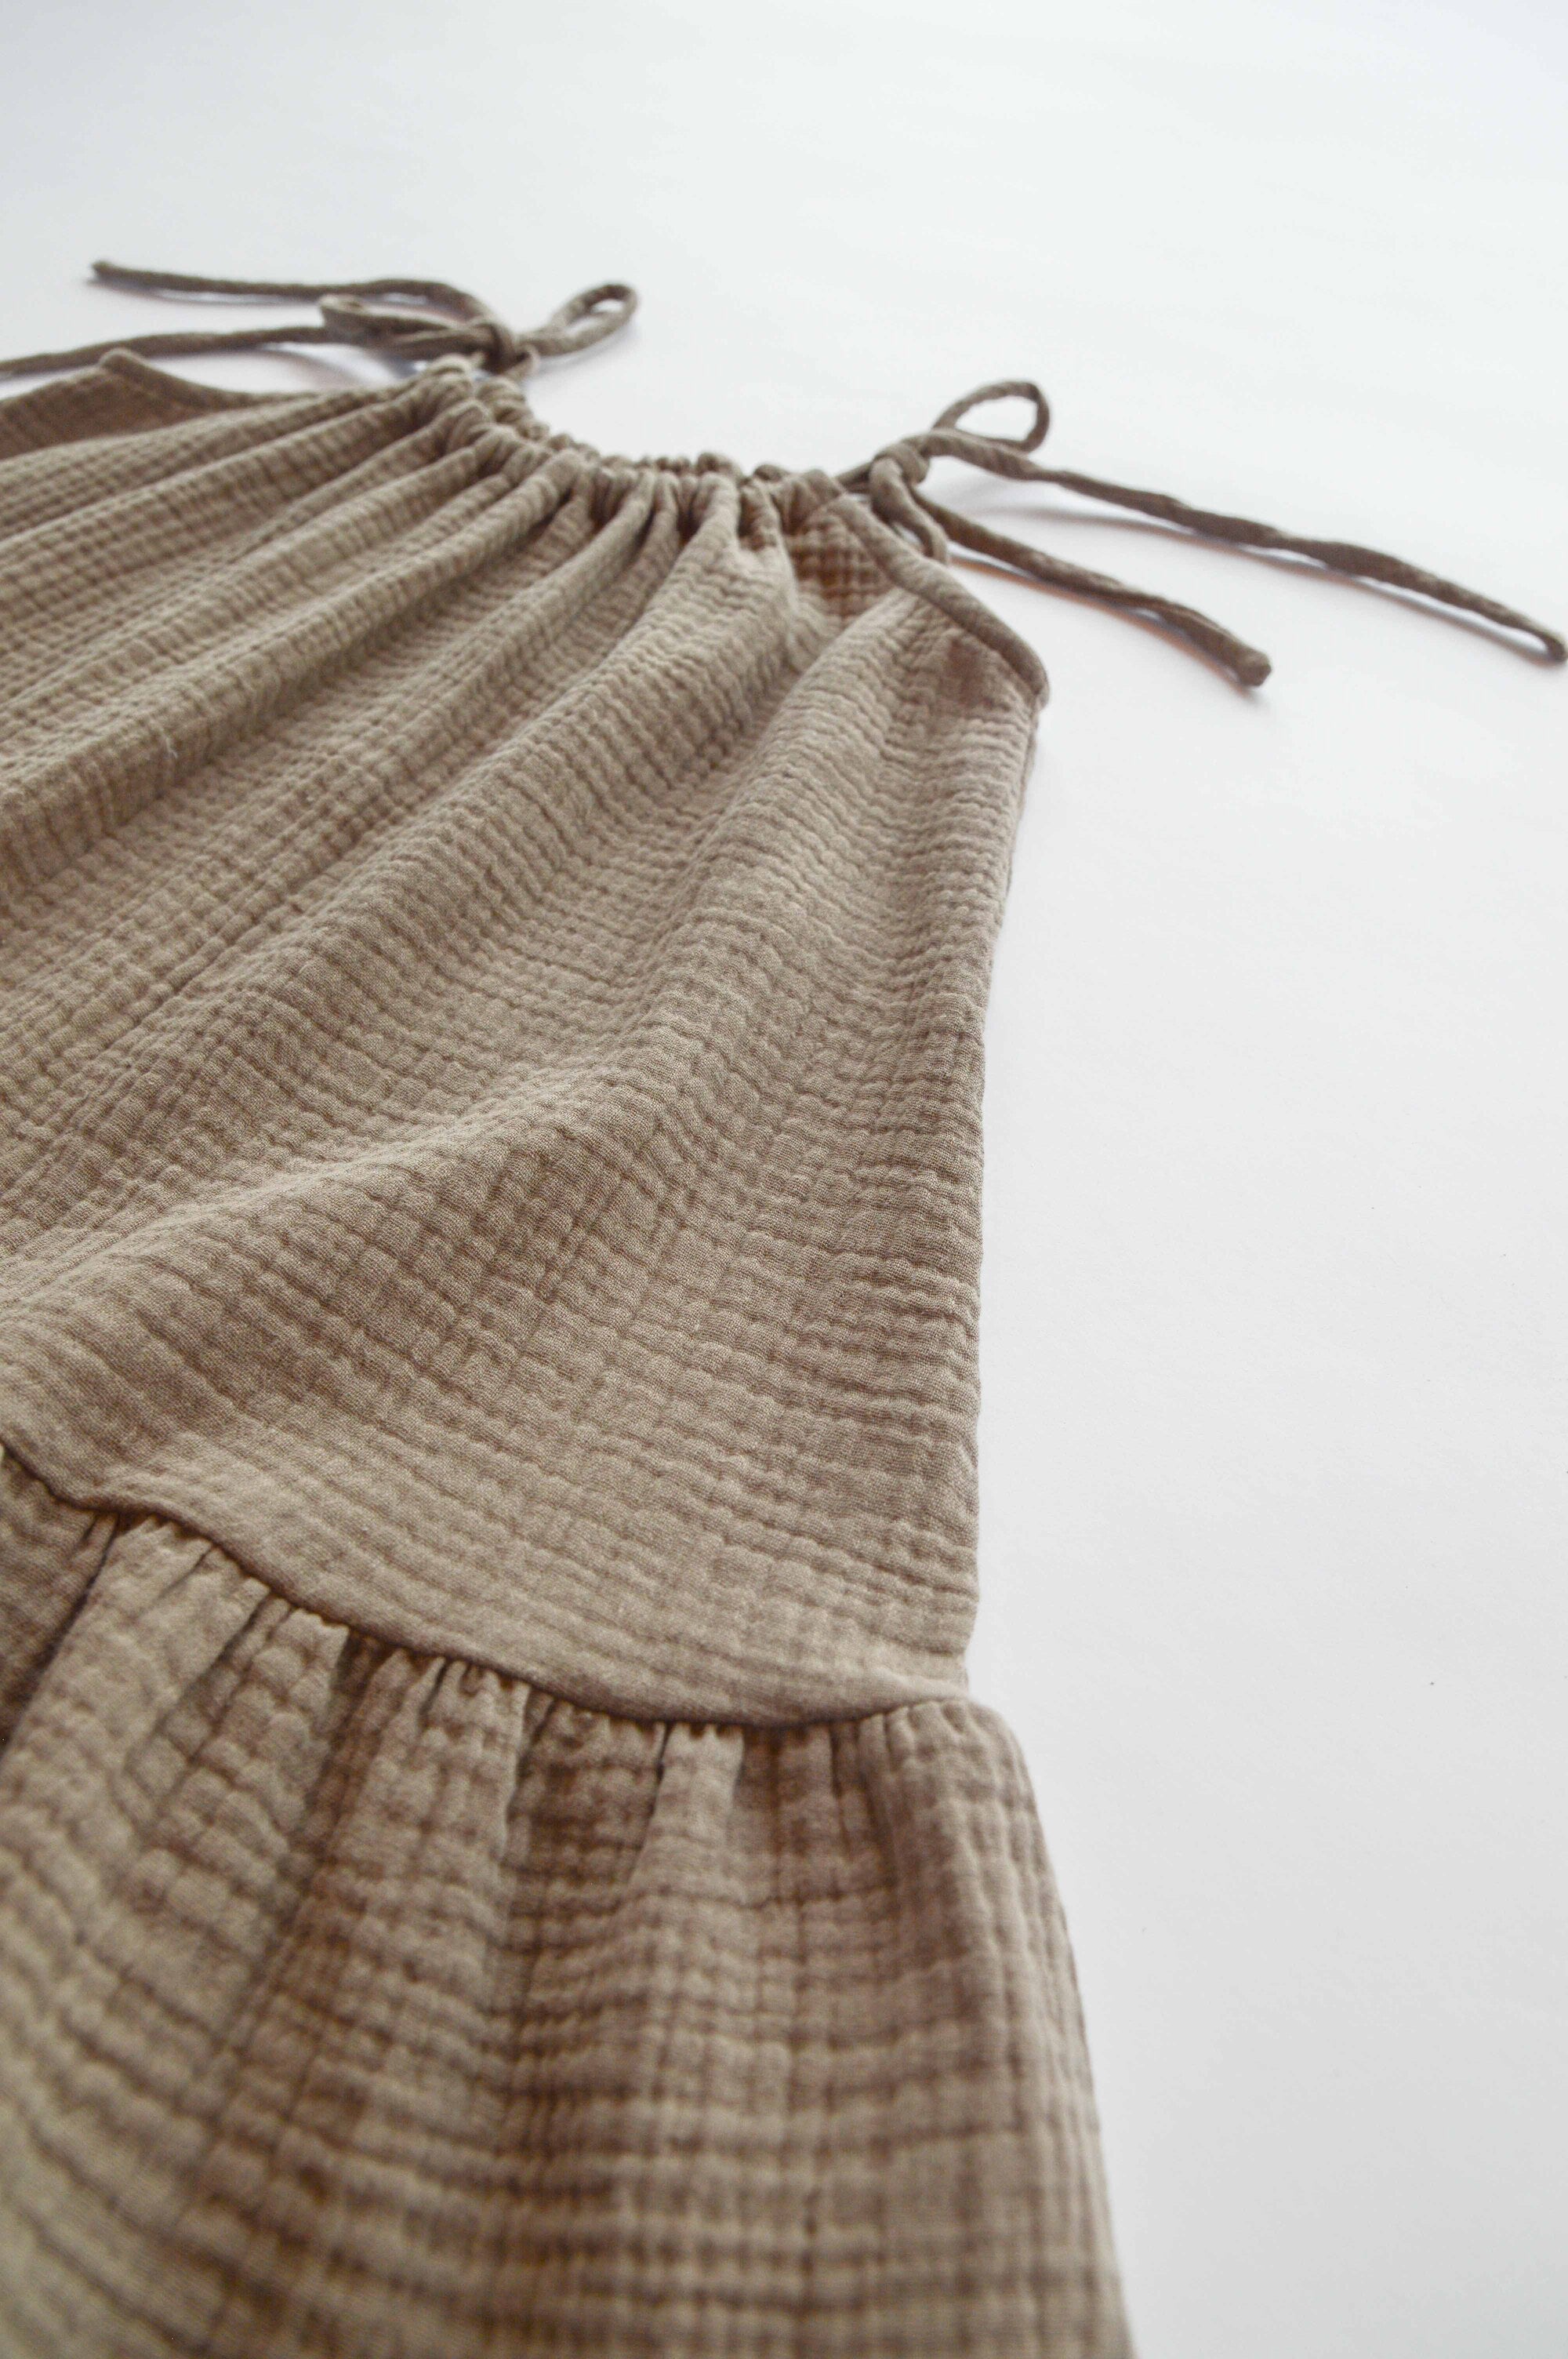 Sustainable girl's dress from lightweight, breathable organic muslin (GOTS) in dusty pink color. Handcrafted with love, made with no nasties, and allergy free. Mommy and me styles are available. Perfect for hot and humid weather and beach holidays.